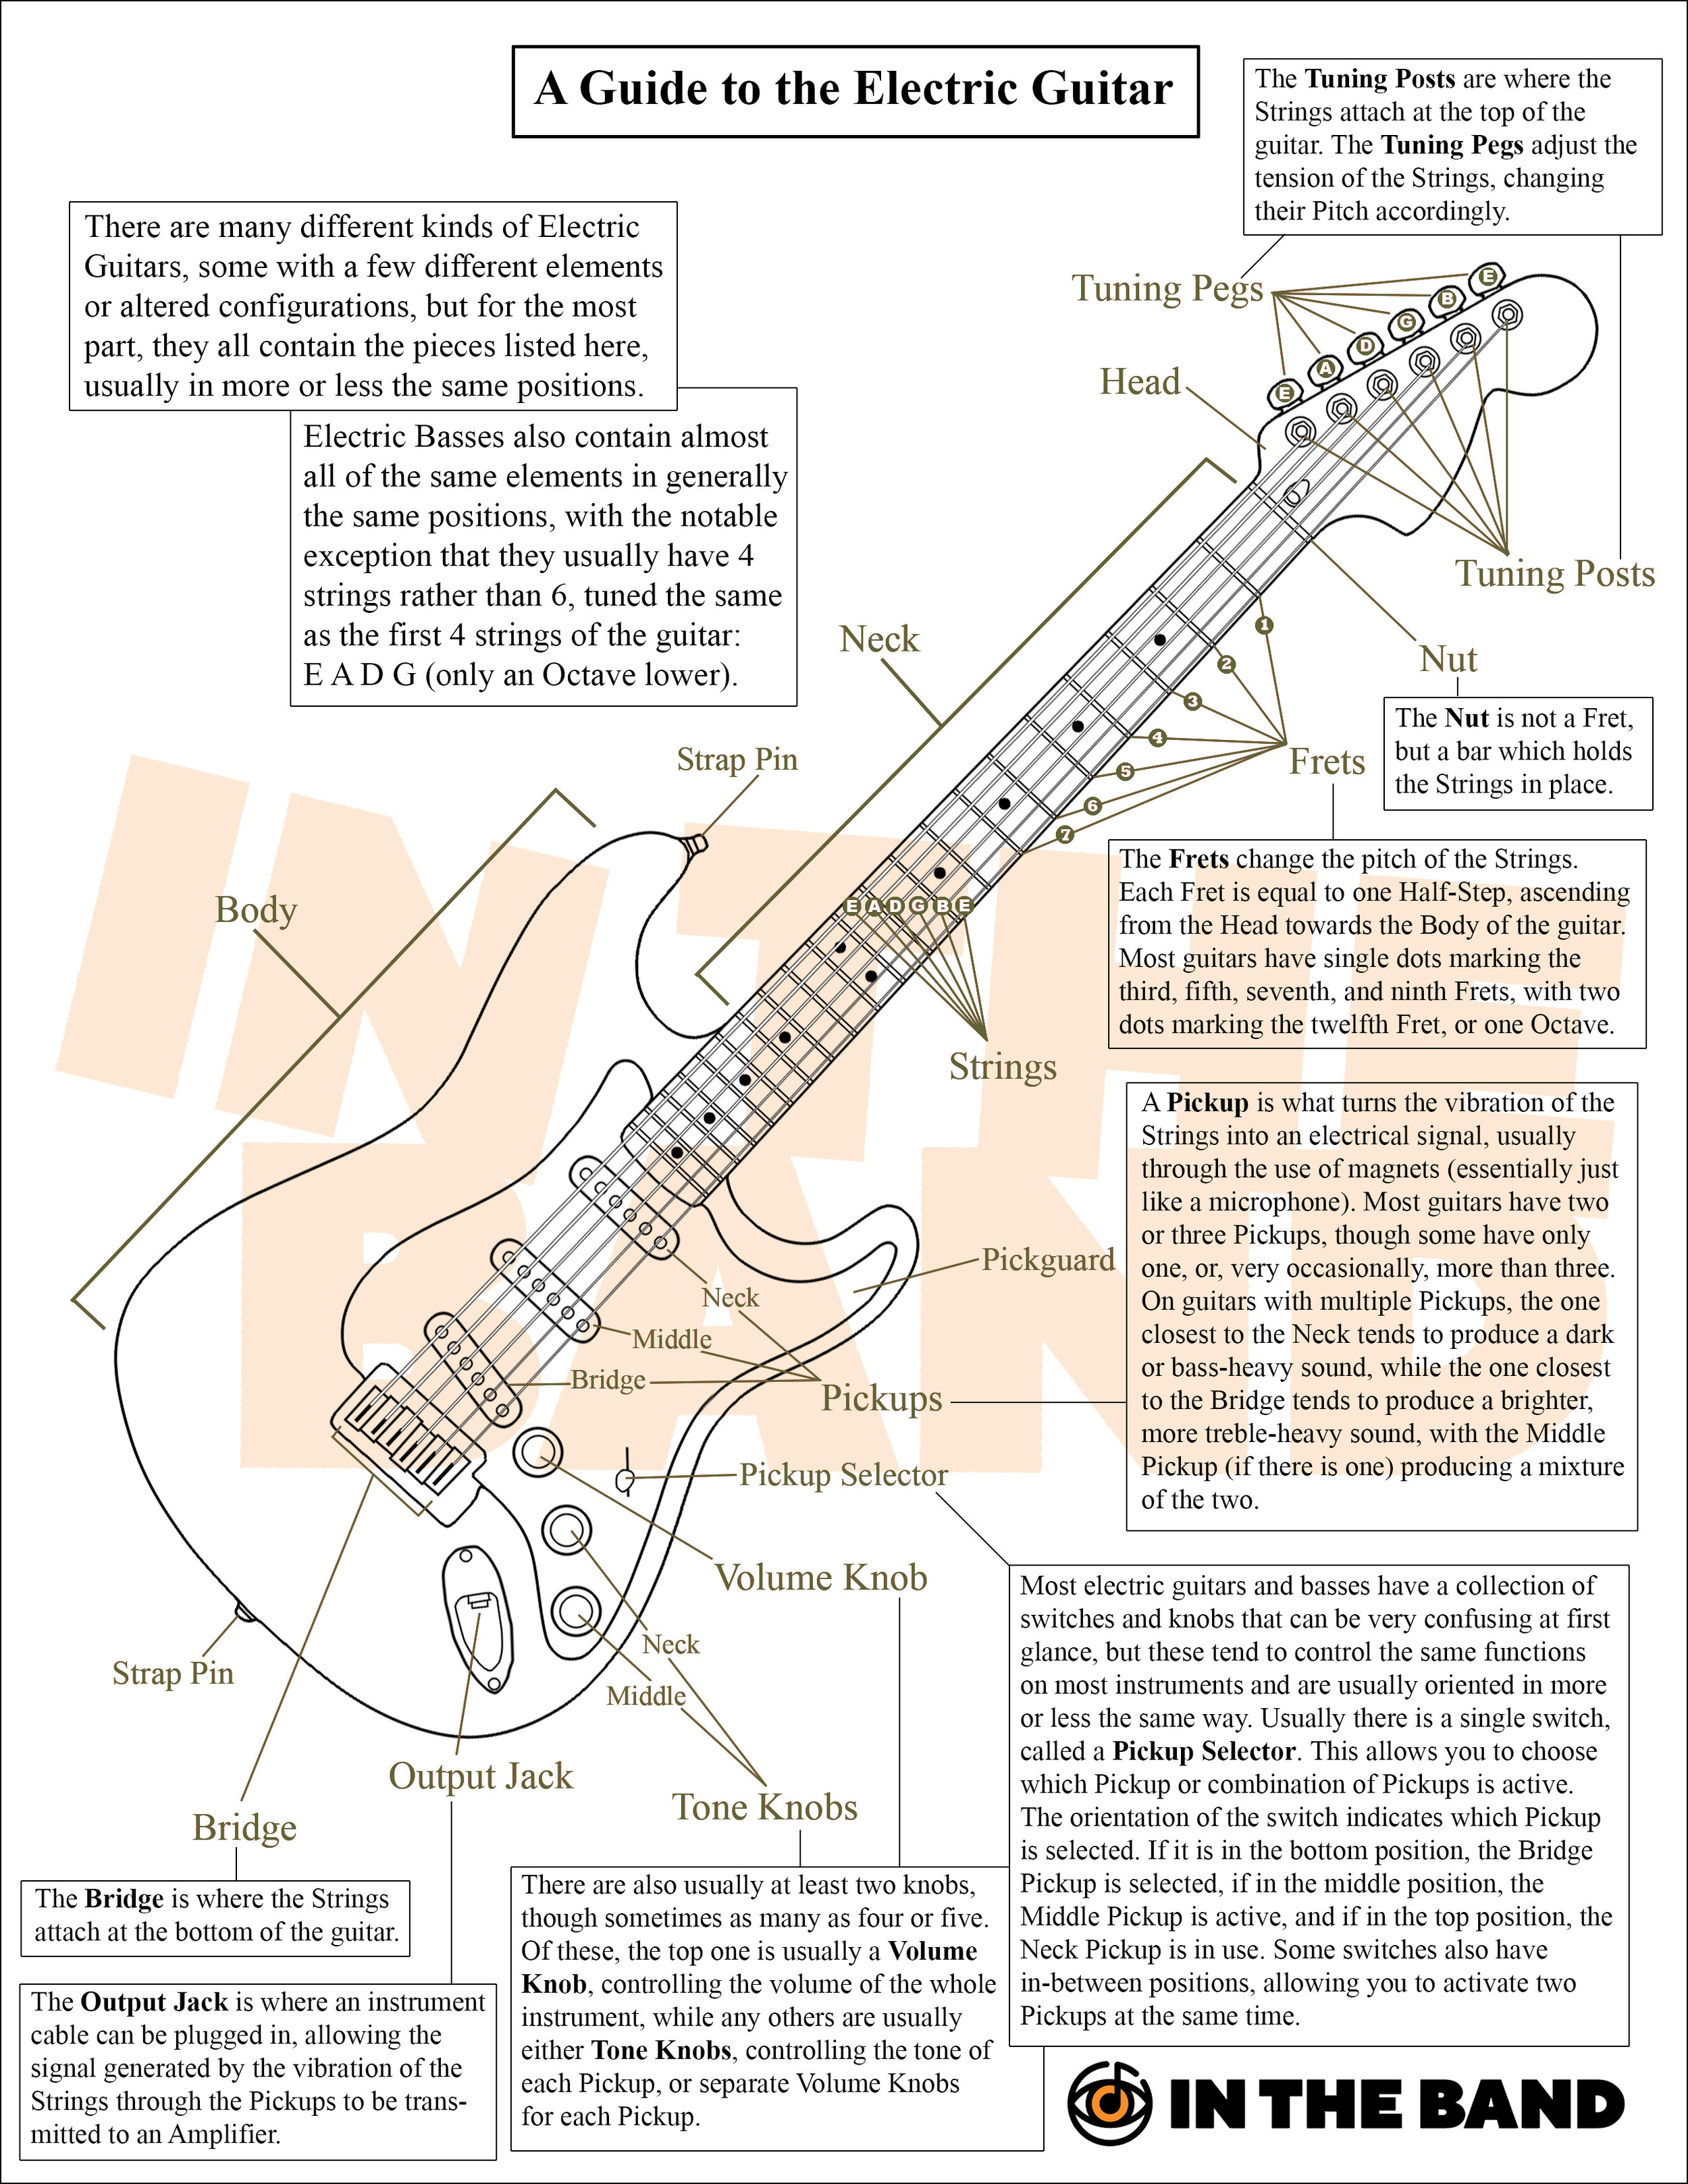 A Guide to the Electric Guitar